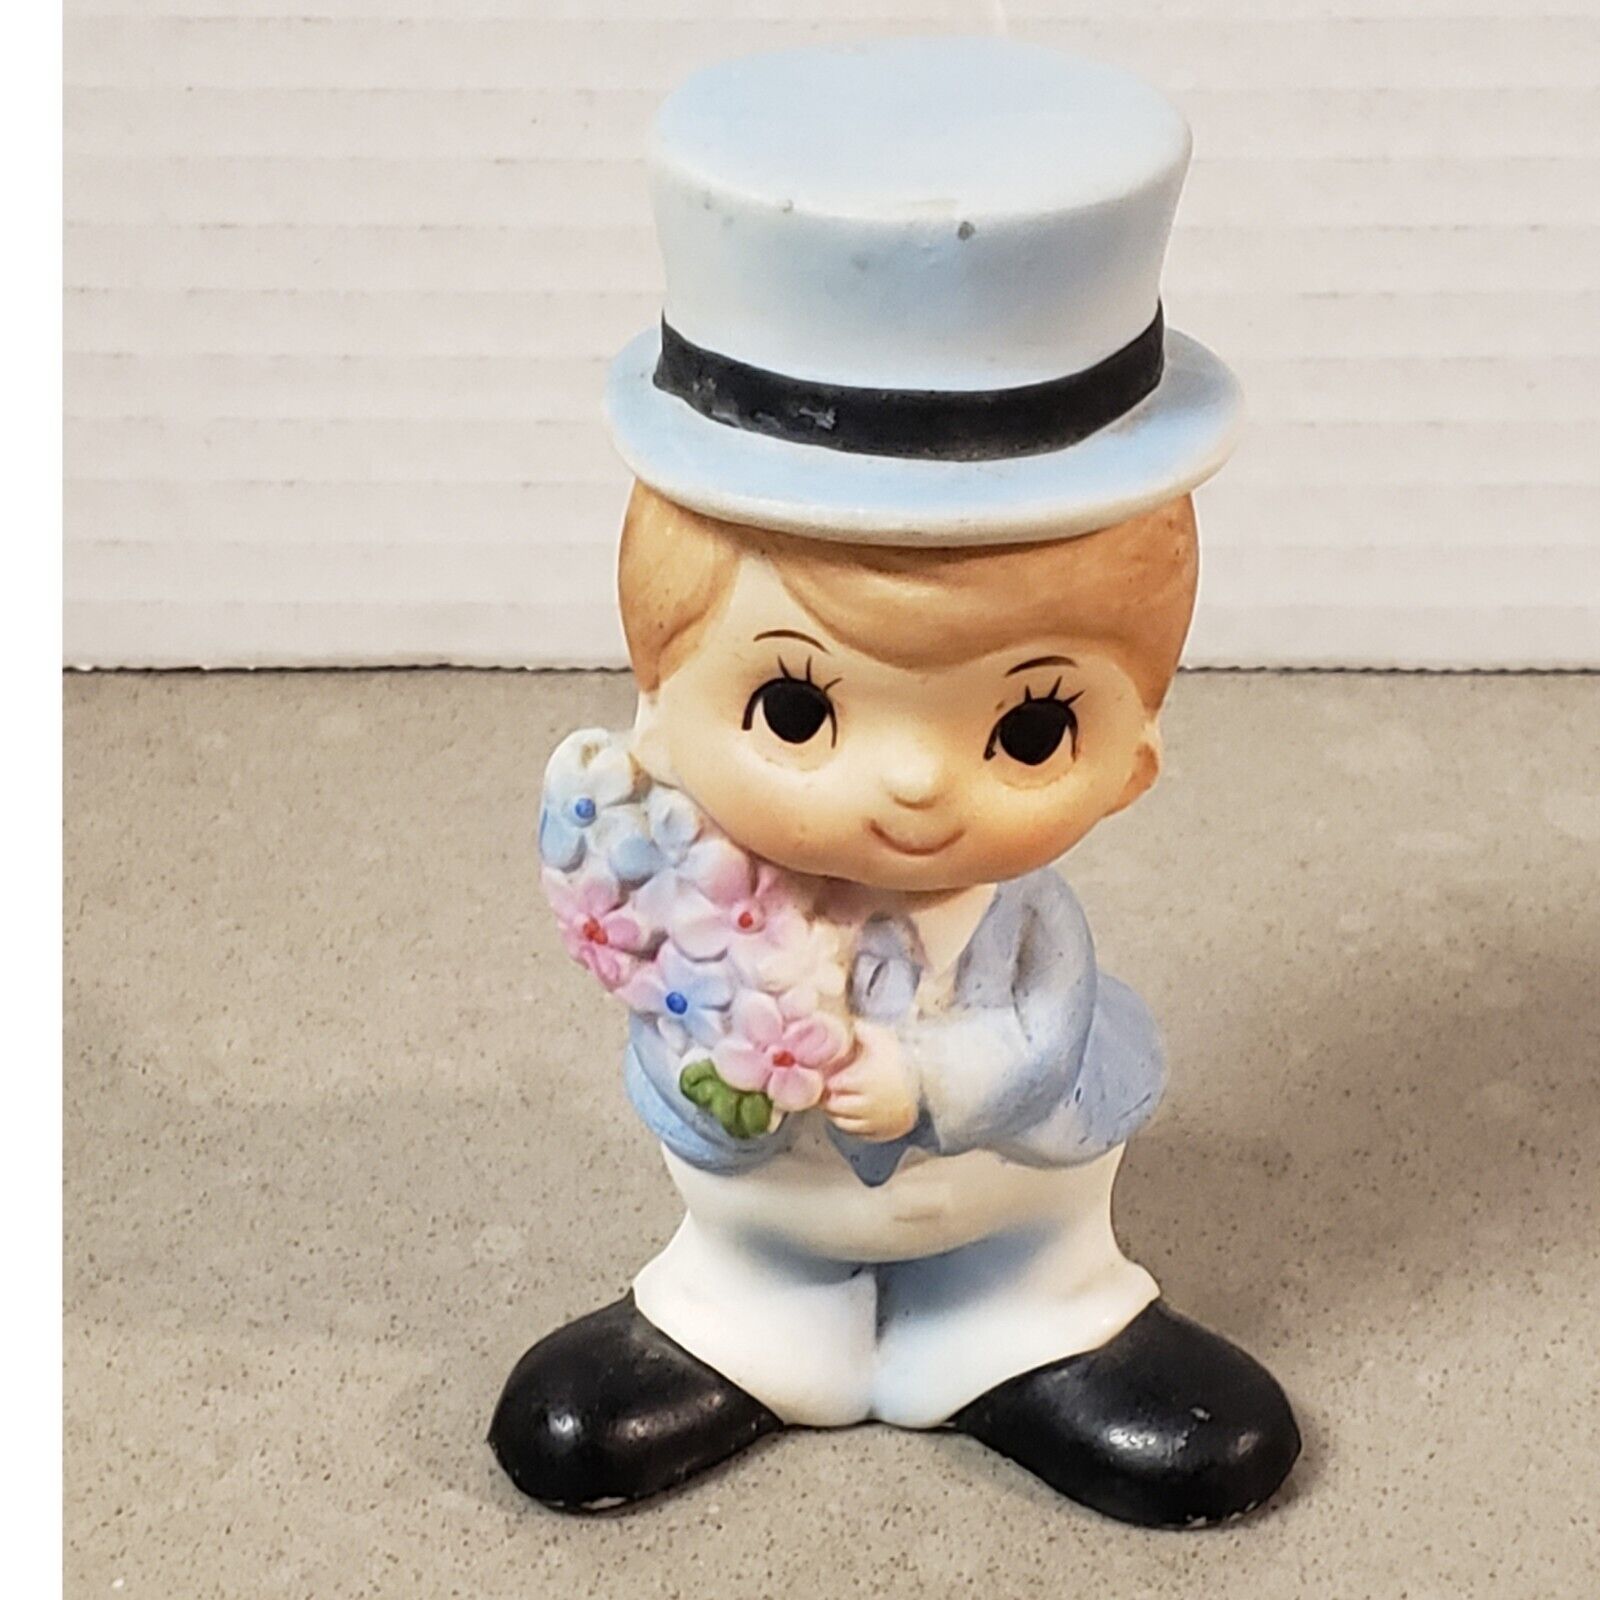 Vintage Cute Boy With Top Hat Holding Flowers Made In Japan Ceramic Figurine